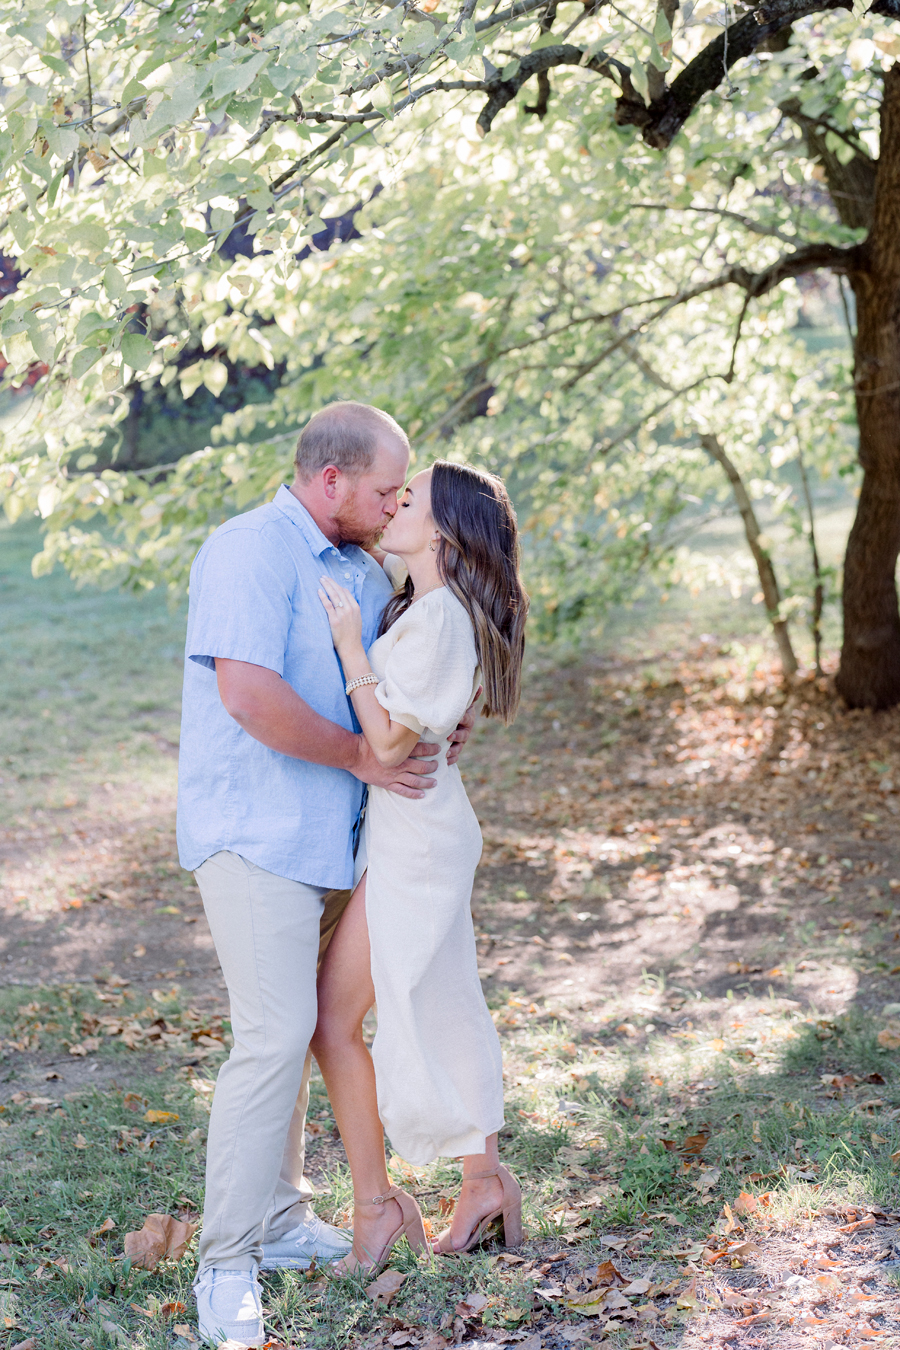 Blackwater Engagement Session by Love Tree Studios.